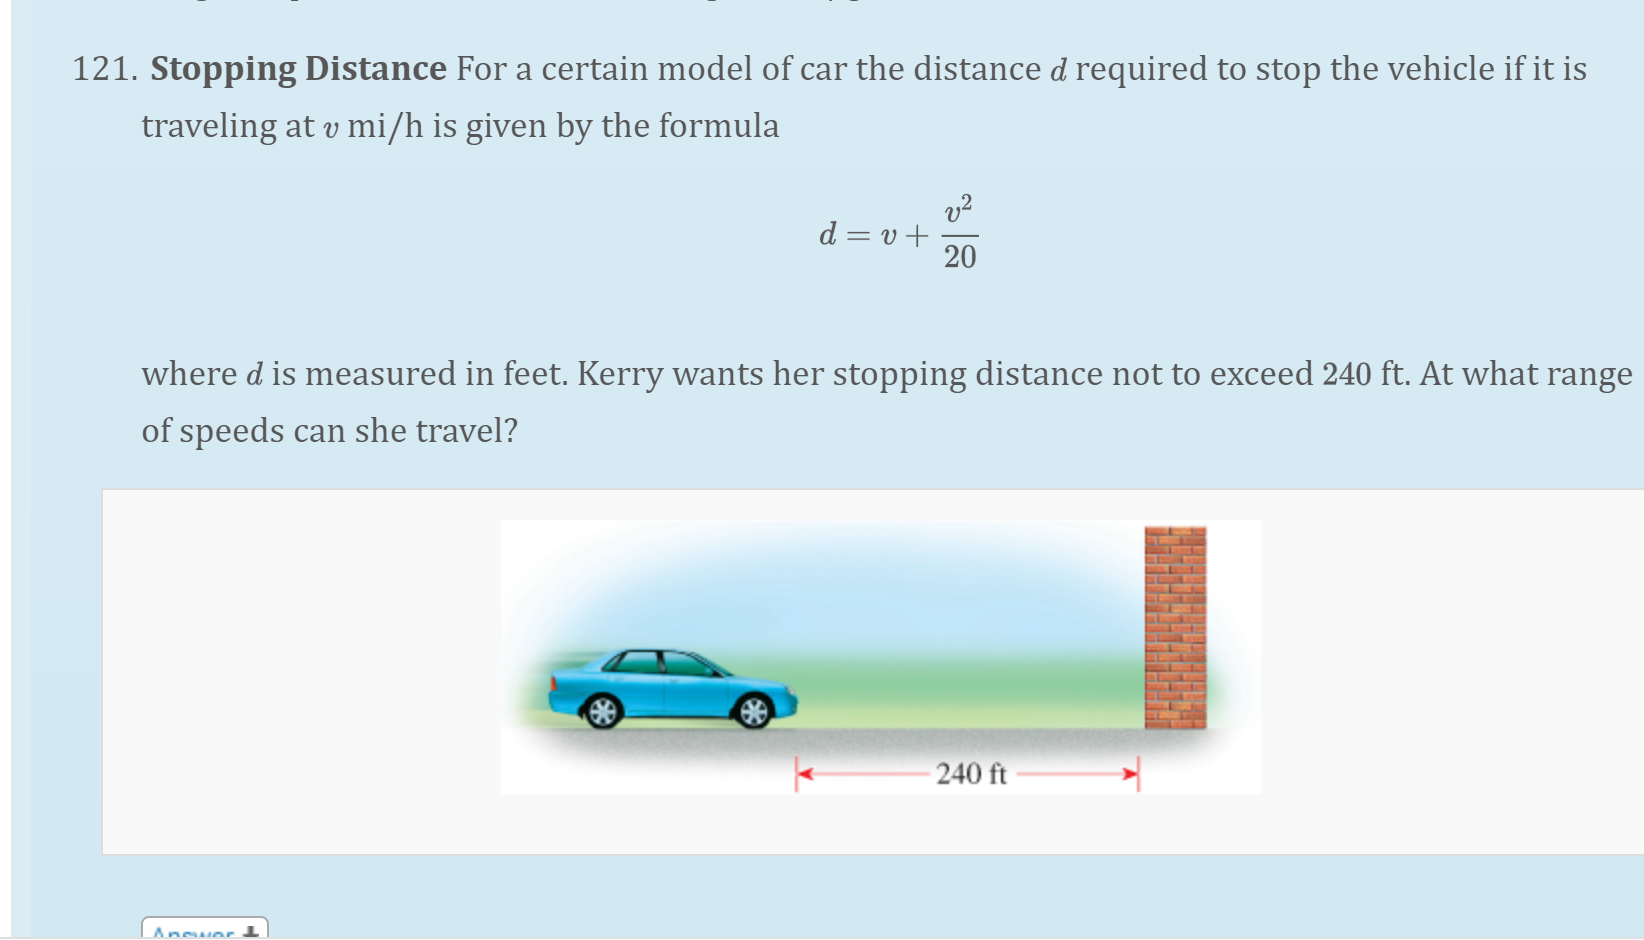 . Stopping Distance For a certain model of car the distance d required to stop the vehicle if it is
traveling at v mi/h is given by the formula
d = v +
20
where d is measured in feet. Kerry wants her stopping distance not to exceed 240 ft. At what range
of speeds can she travel?
